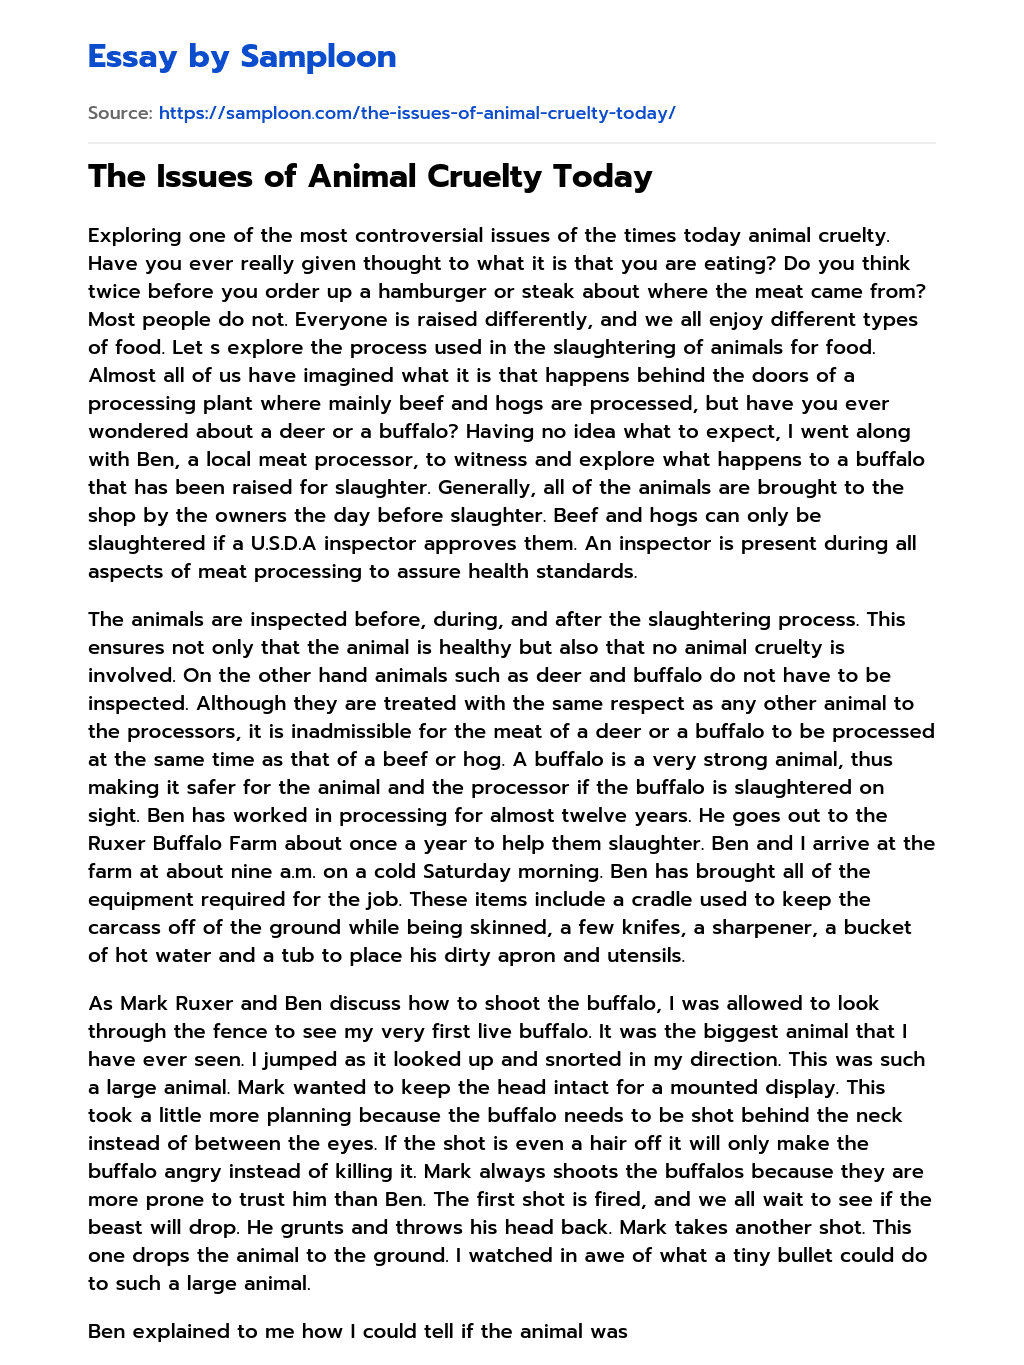 The Issues of Animal Cruelty Today essay